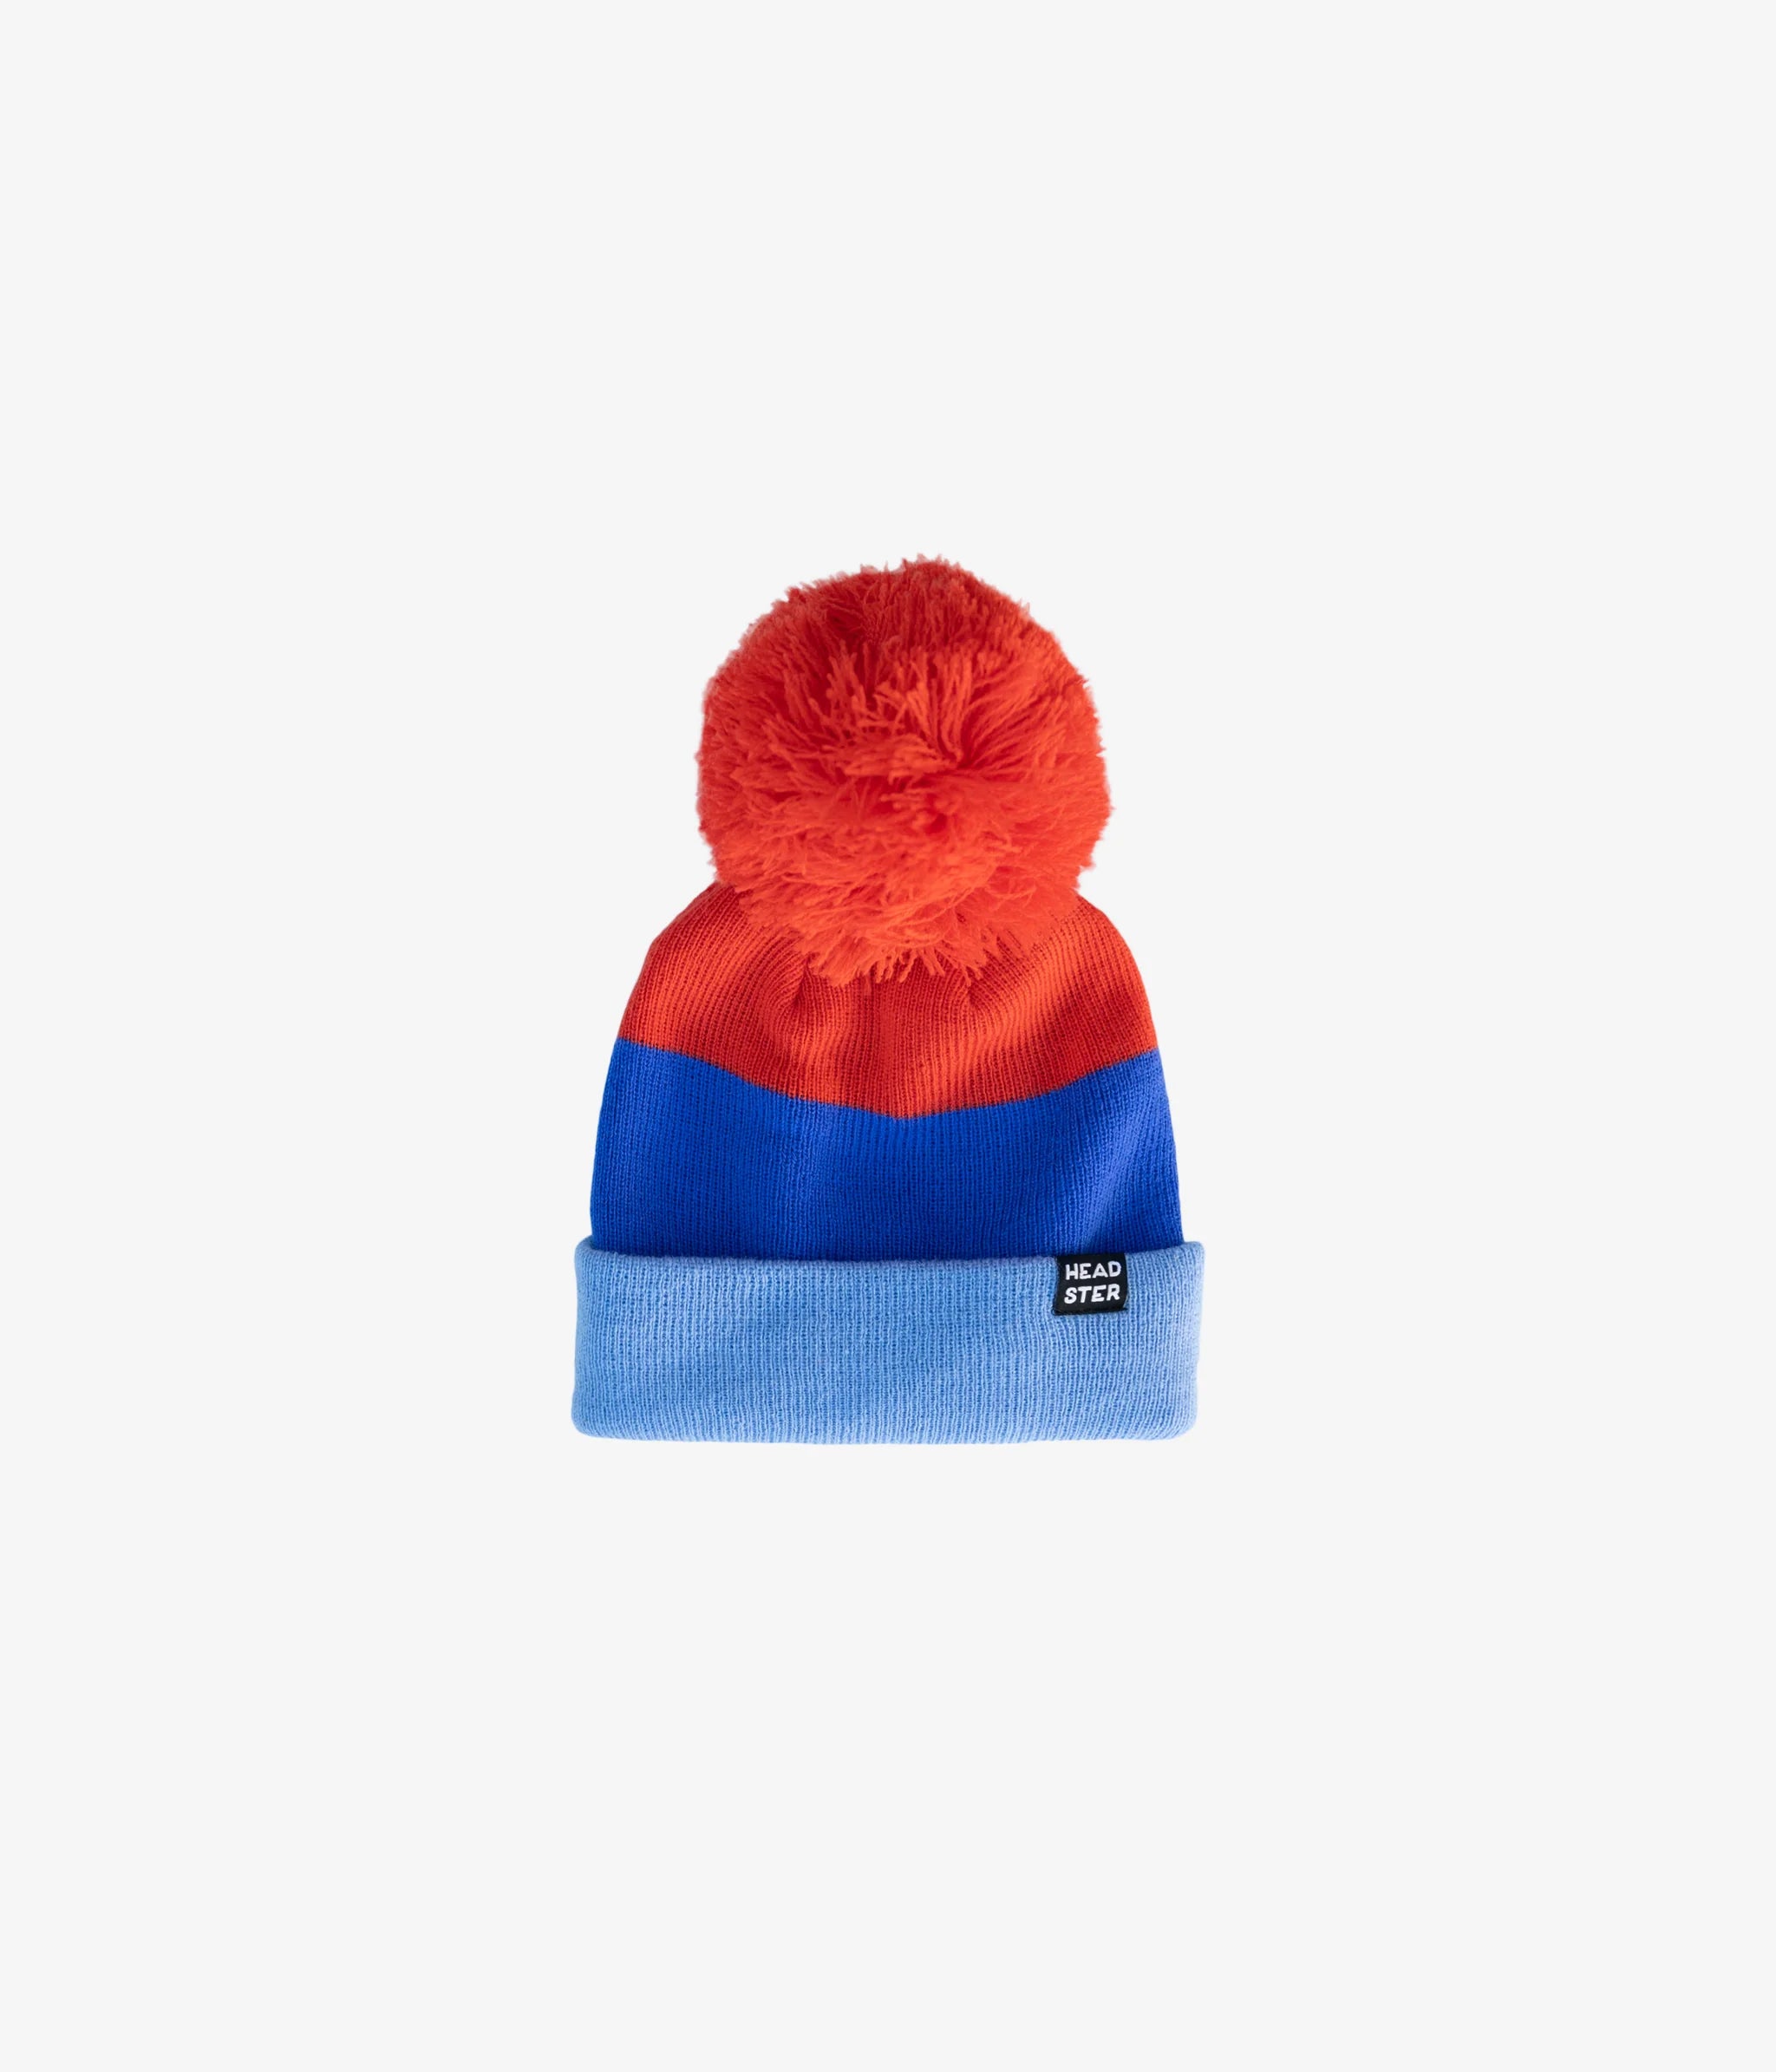 Headster - Tuque Tricolor